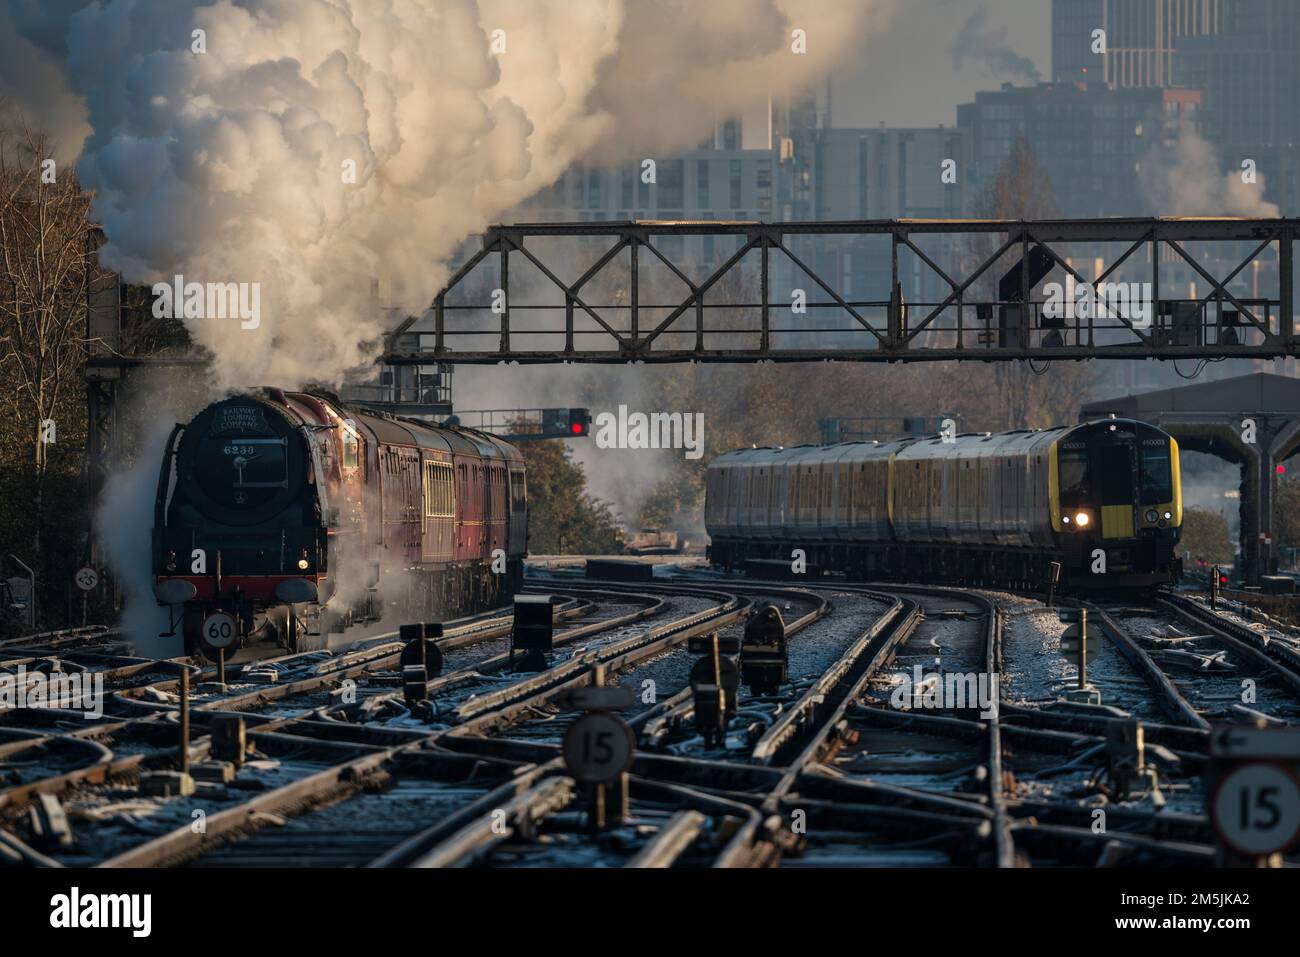 Old and new, an electric locomotive, beside steam train 46233 approaching Clapham Junction on a cold December morning, London skyline in background Stock Photo